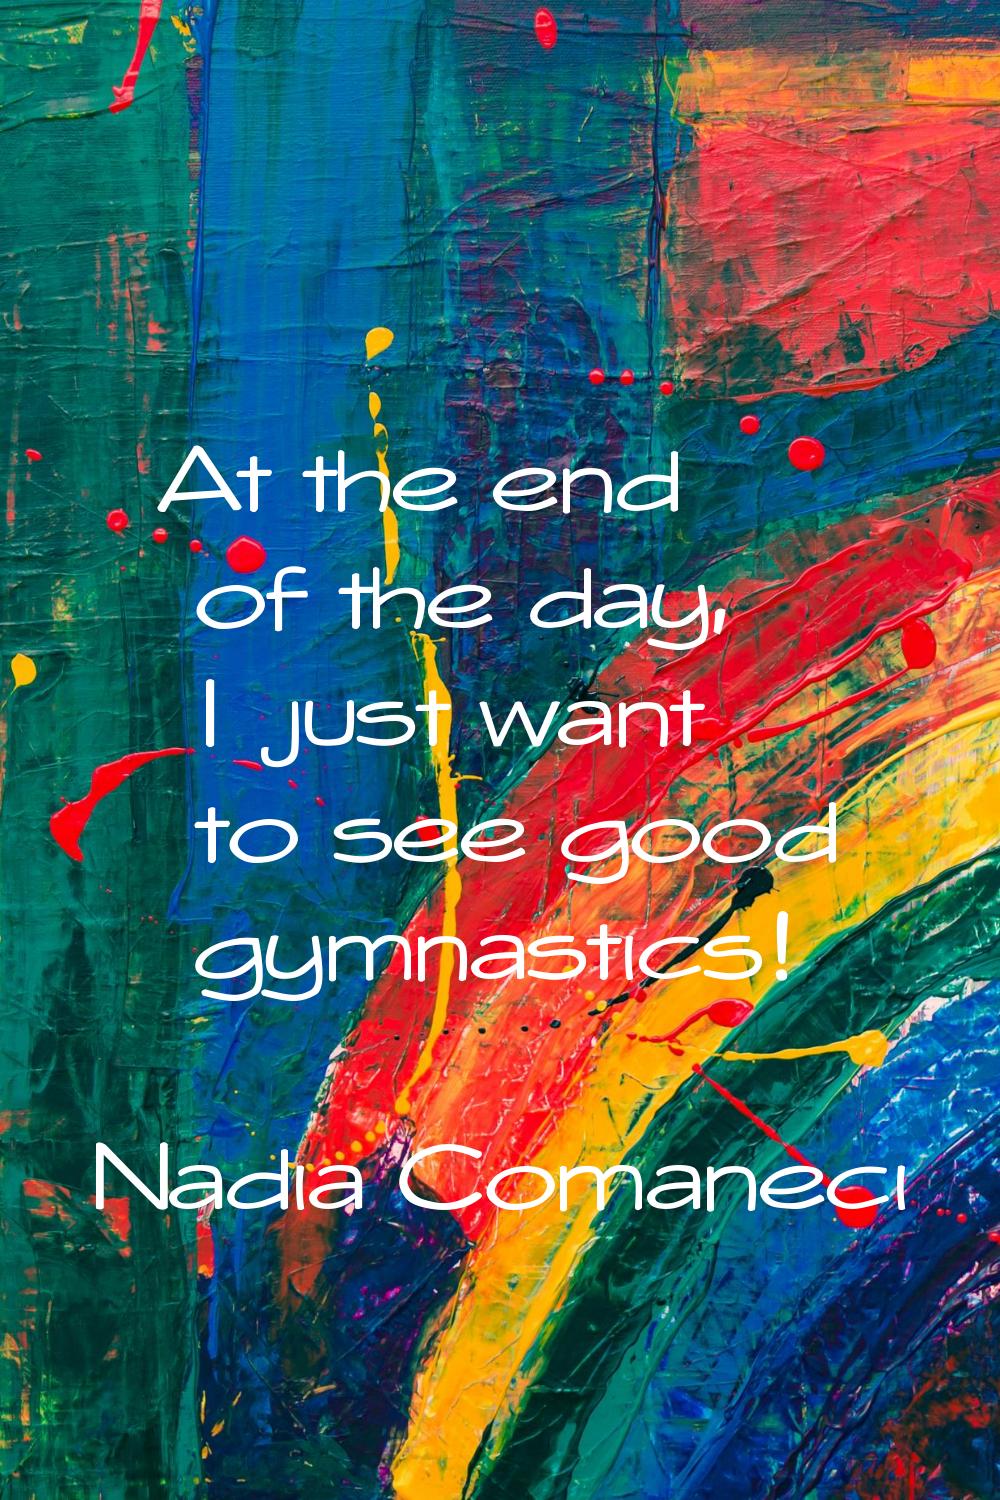 At the end of the day, I just want to see good gymnastics!